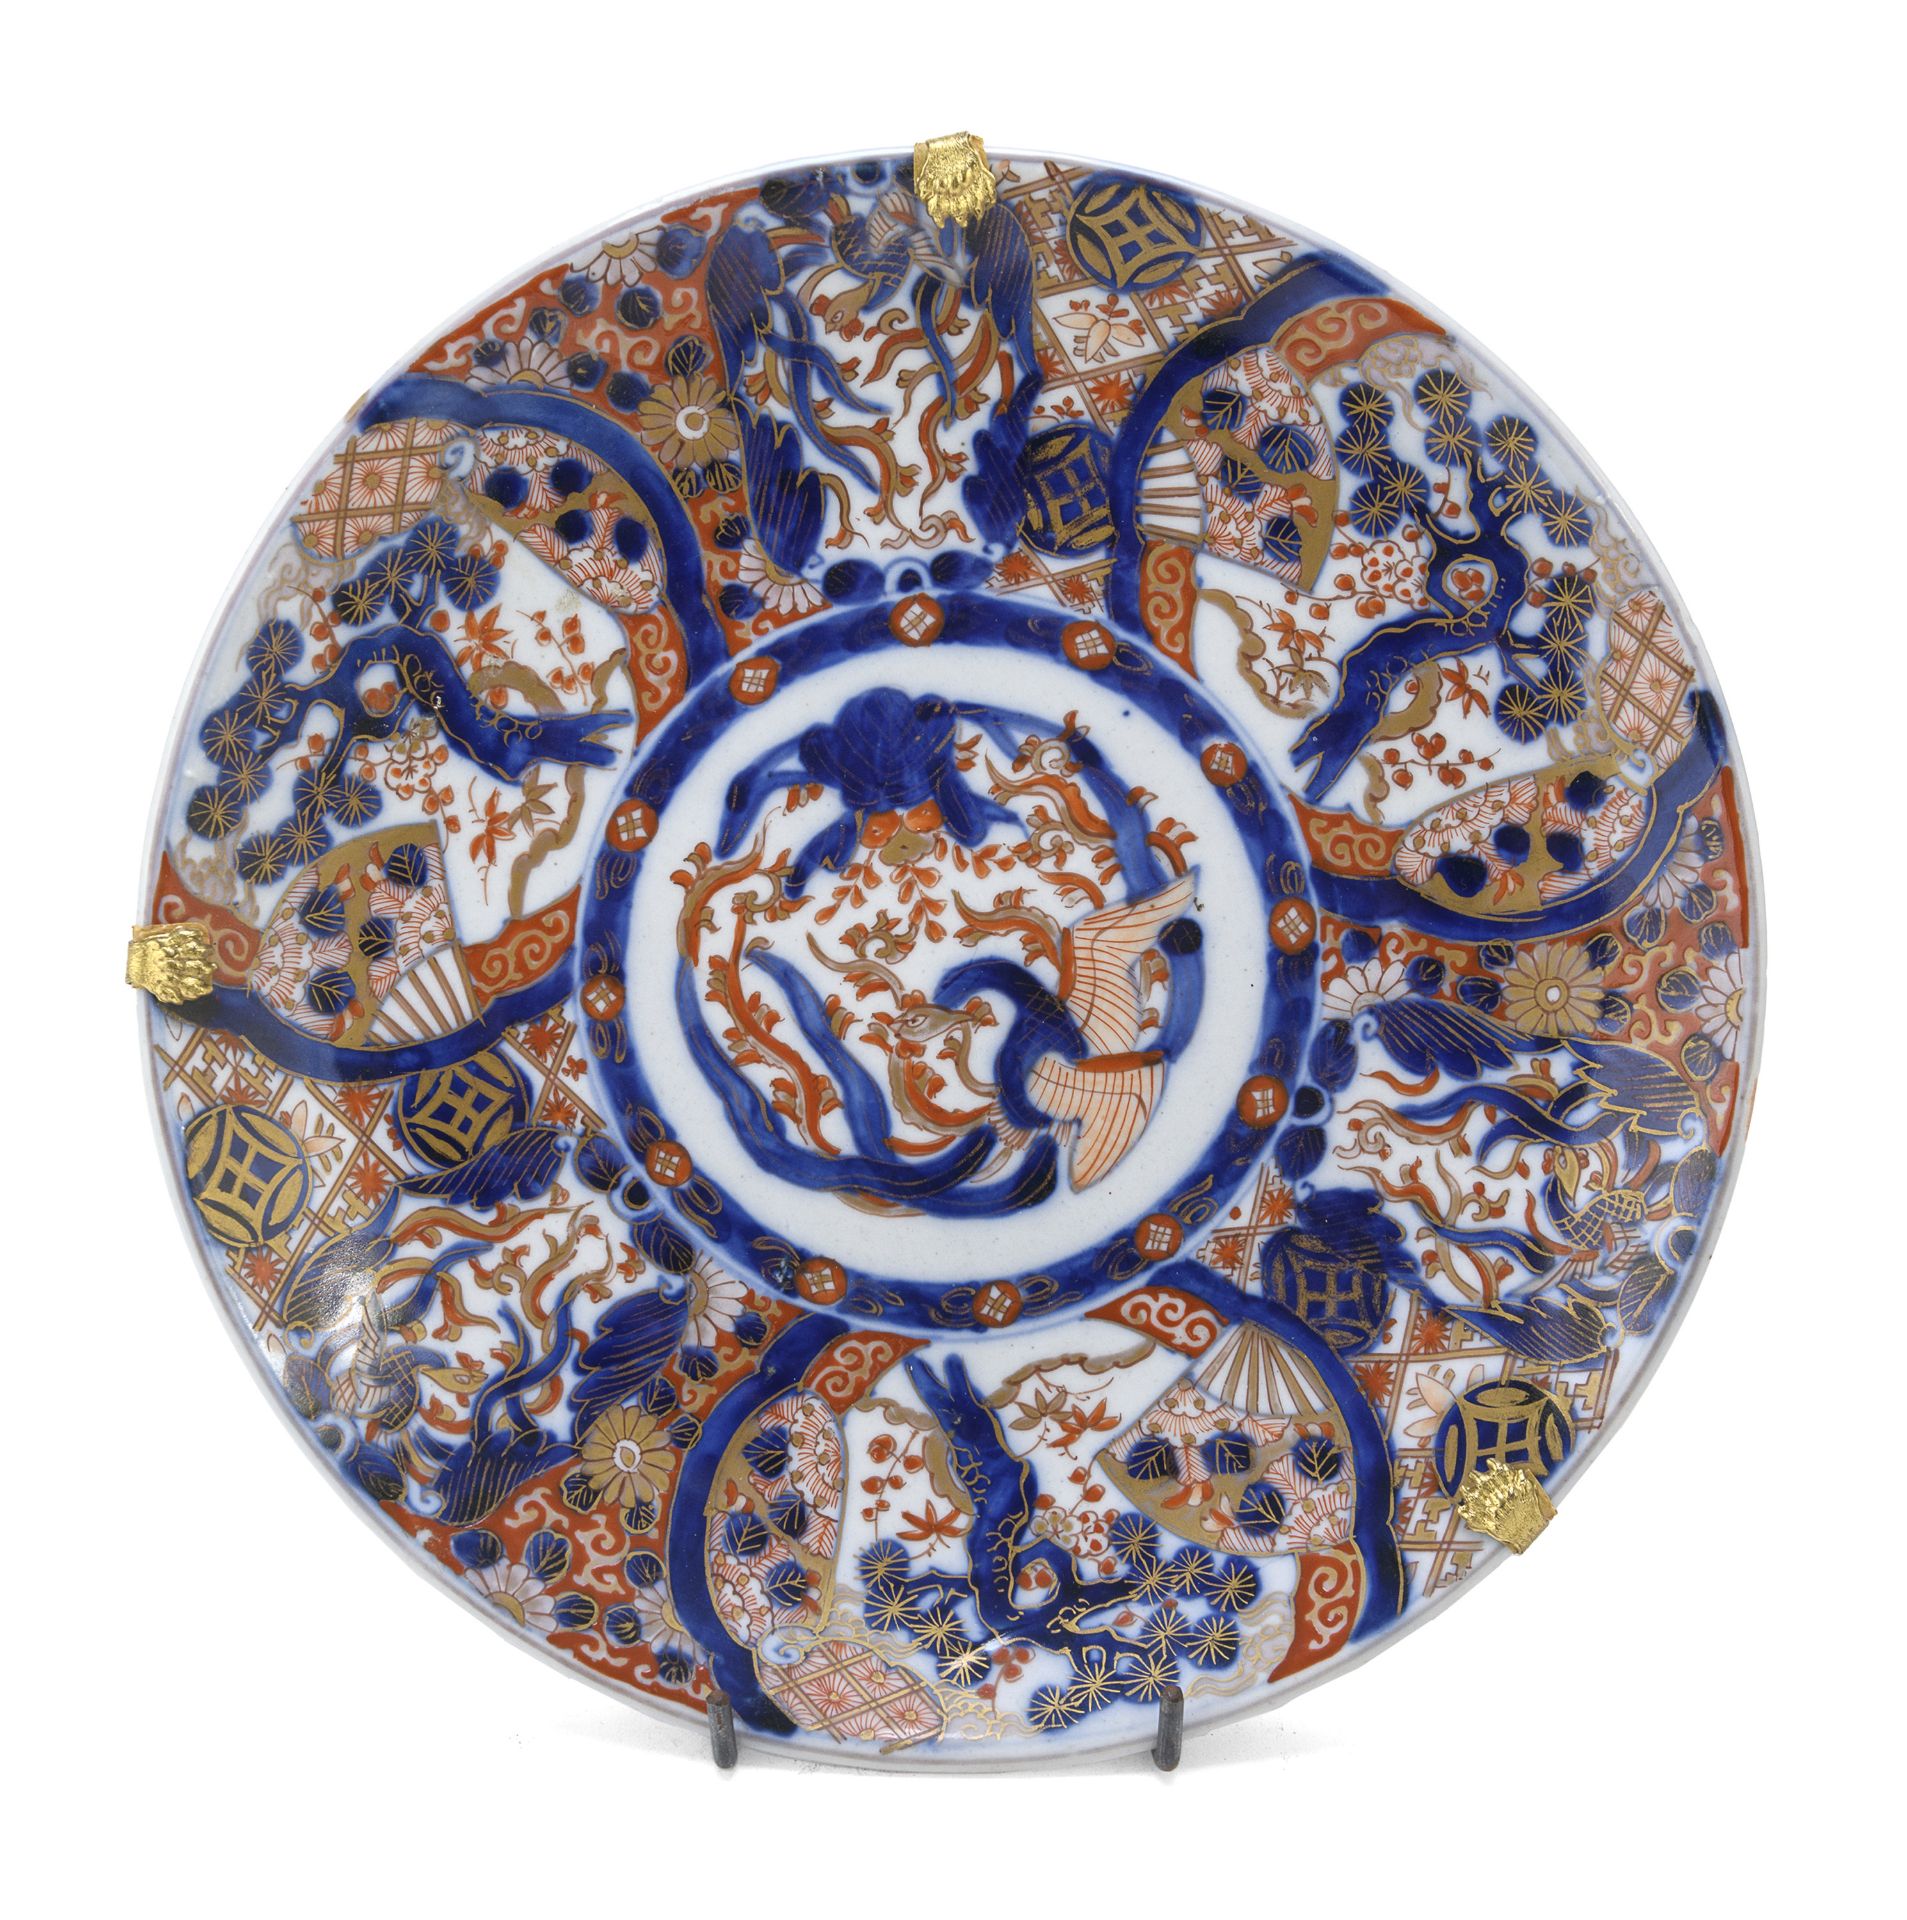 A JAPANESE ENAMELED PORCELAIN DISH. LATE 19TH EARLY 20TH CENTURY.